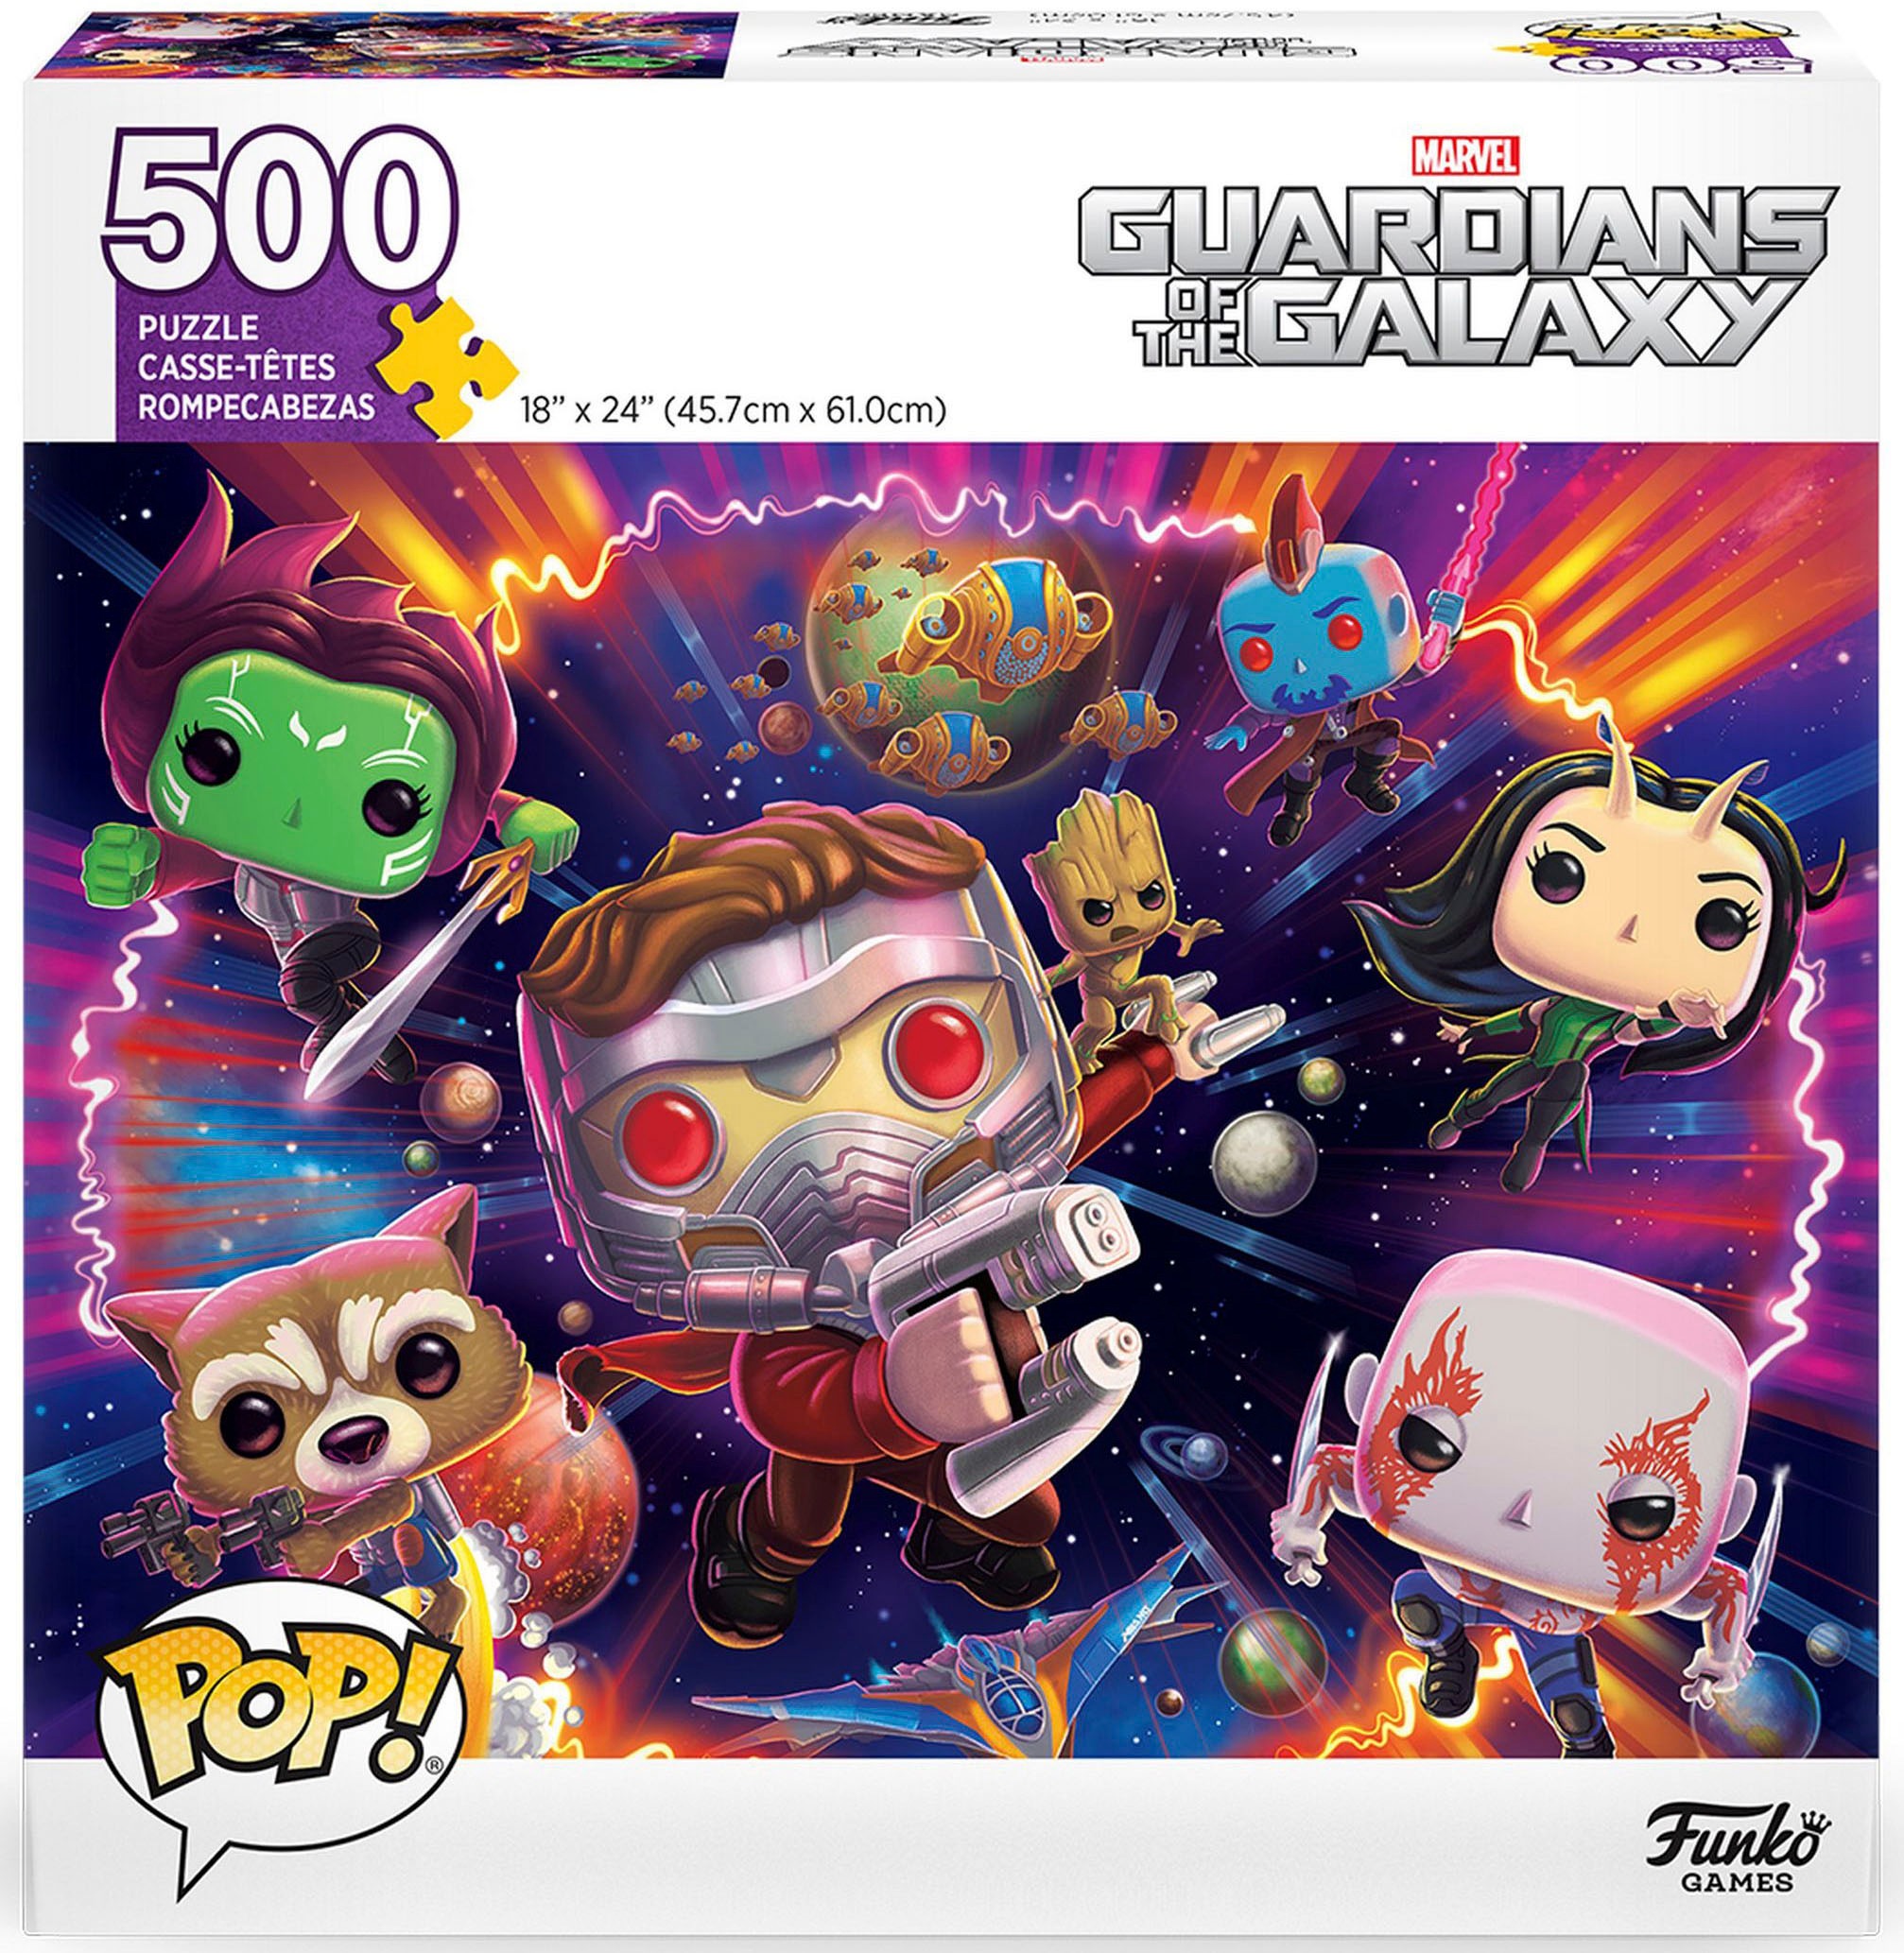 Puzzle »Pop! Puzzle, Marvel Guardians of the Galaxy«